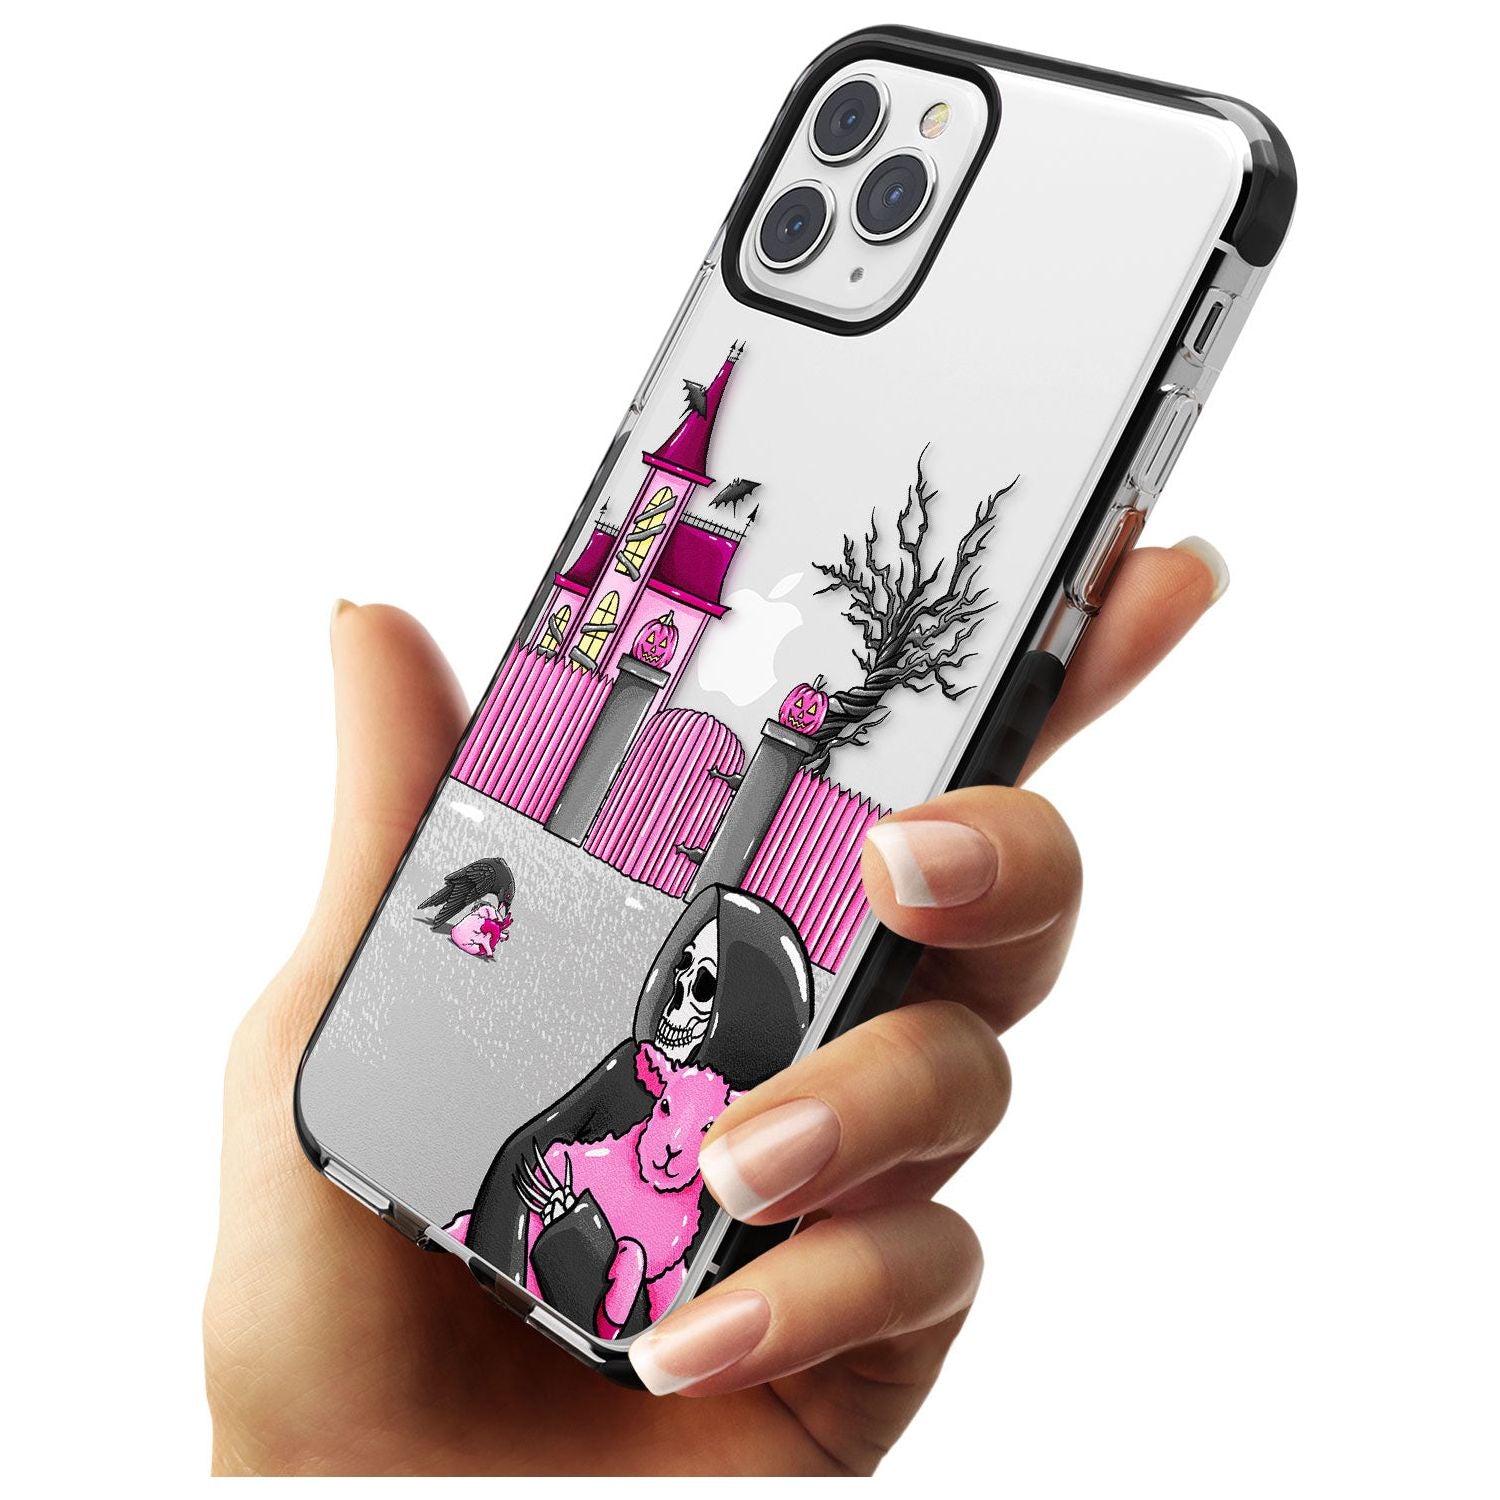 Left With My Heart Black Impact Phone Case for iPhone 11